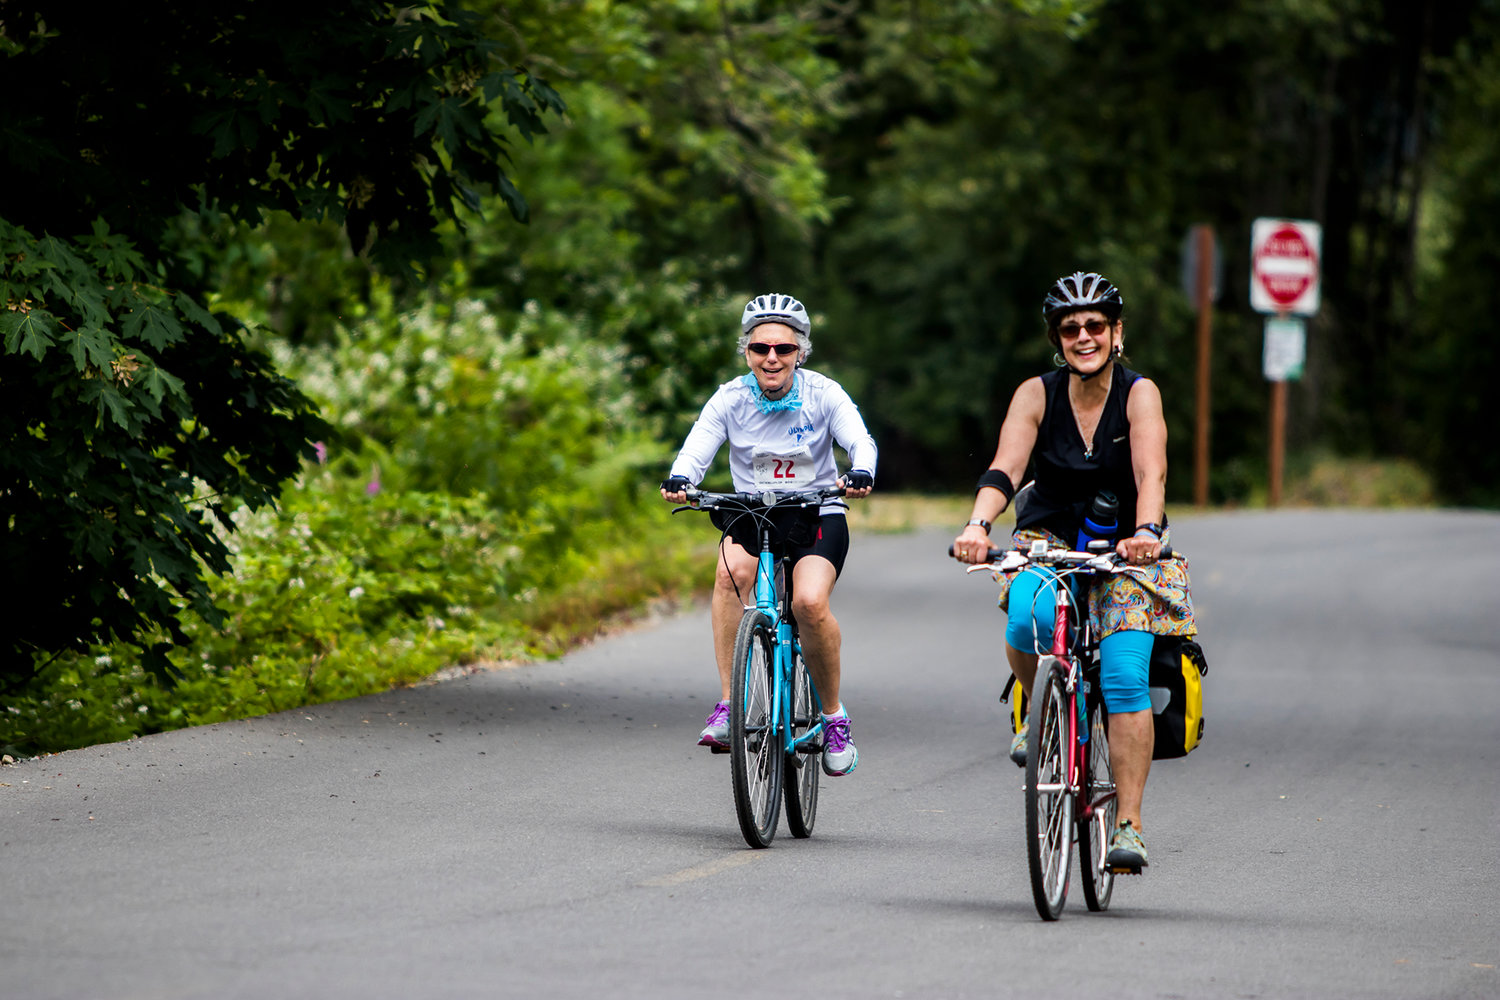 Riders begin their journey at the Willapa Trailhead during the annual Ride The Willpapa event Saturday afternoon in Chehalis.